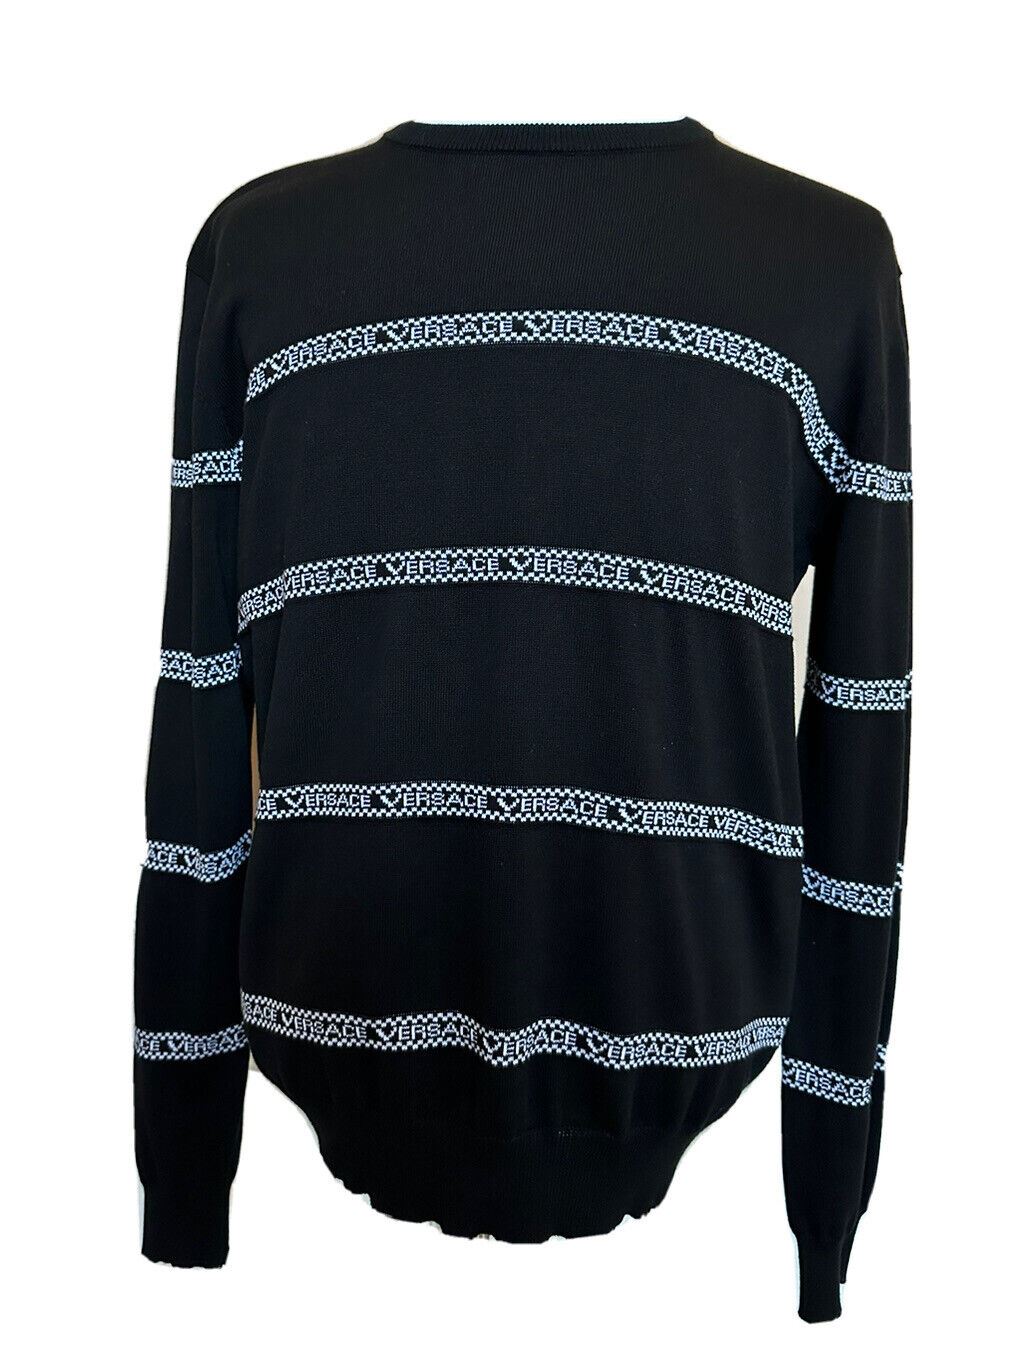 NWT $850 Versace Logo Cotton Knit Sweater Black 54 (2XL) Italy A89468S